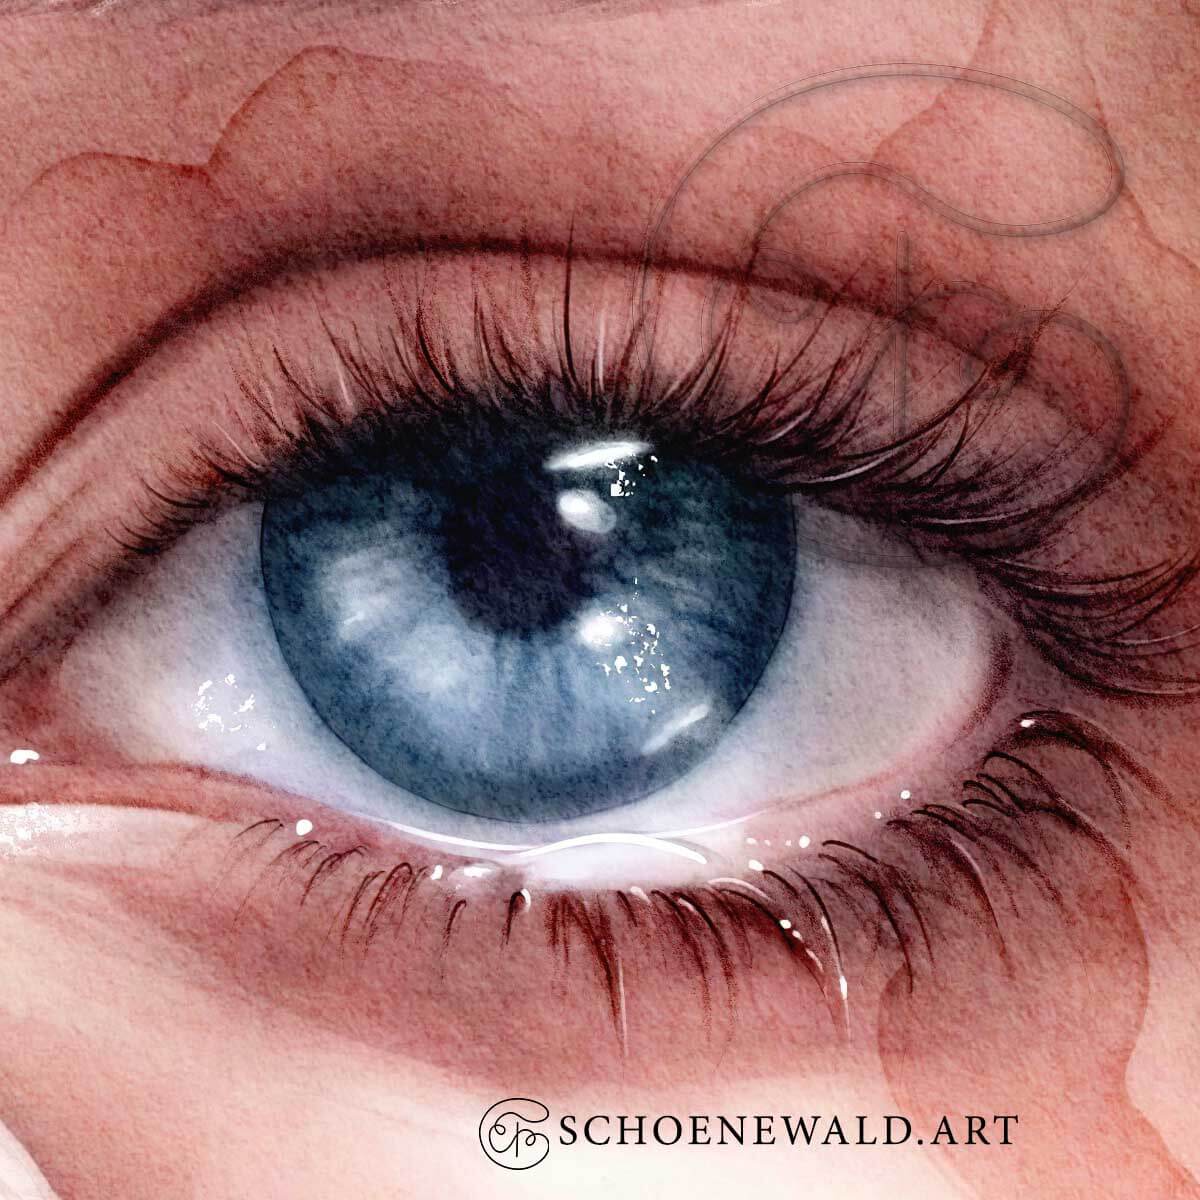 Closeup of an eye painting by Schoenewald art to demonstrate the level of details